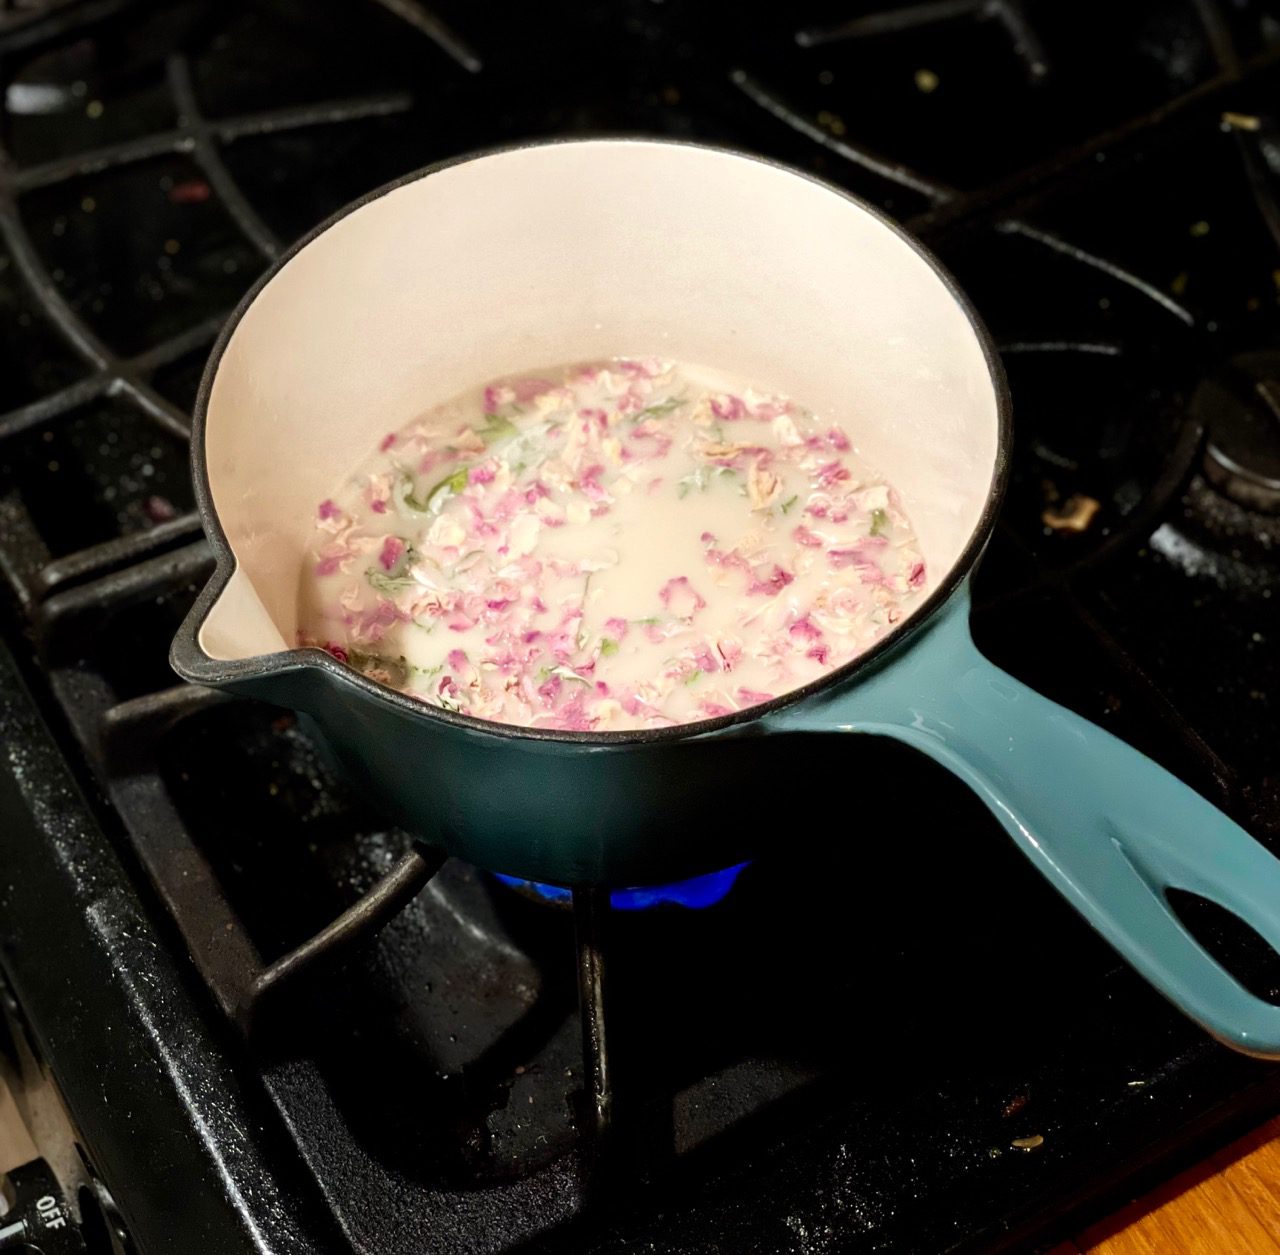 Teal cast-iron, enamel-covered saucepan with a handle simmering charmingly on a dark gas-powered stove top. Inside is oat milk and a colorful herbal blend of rose petals and mugwort